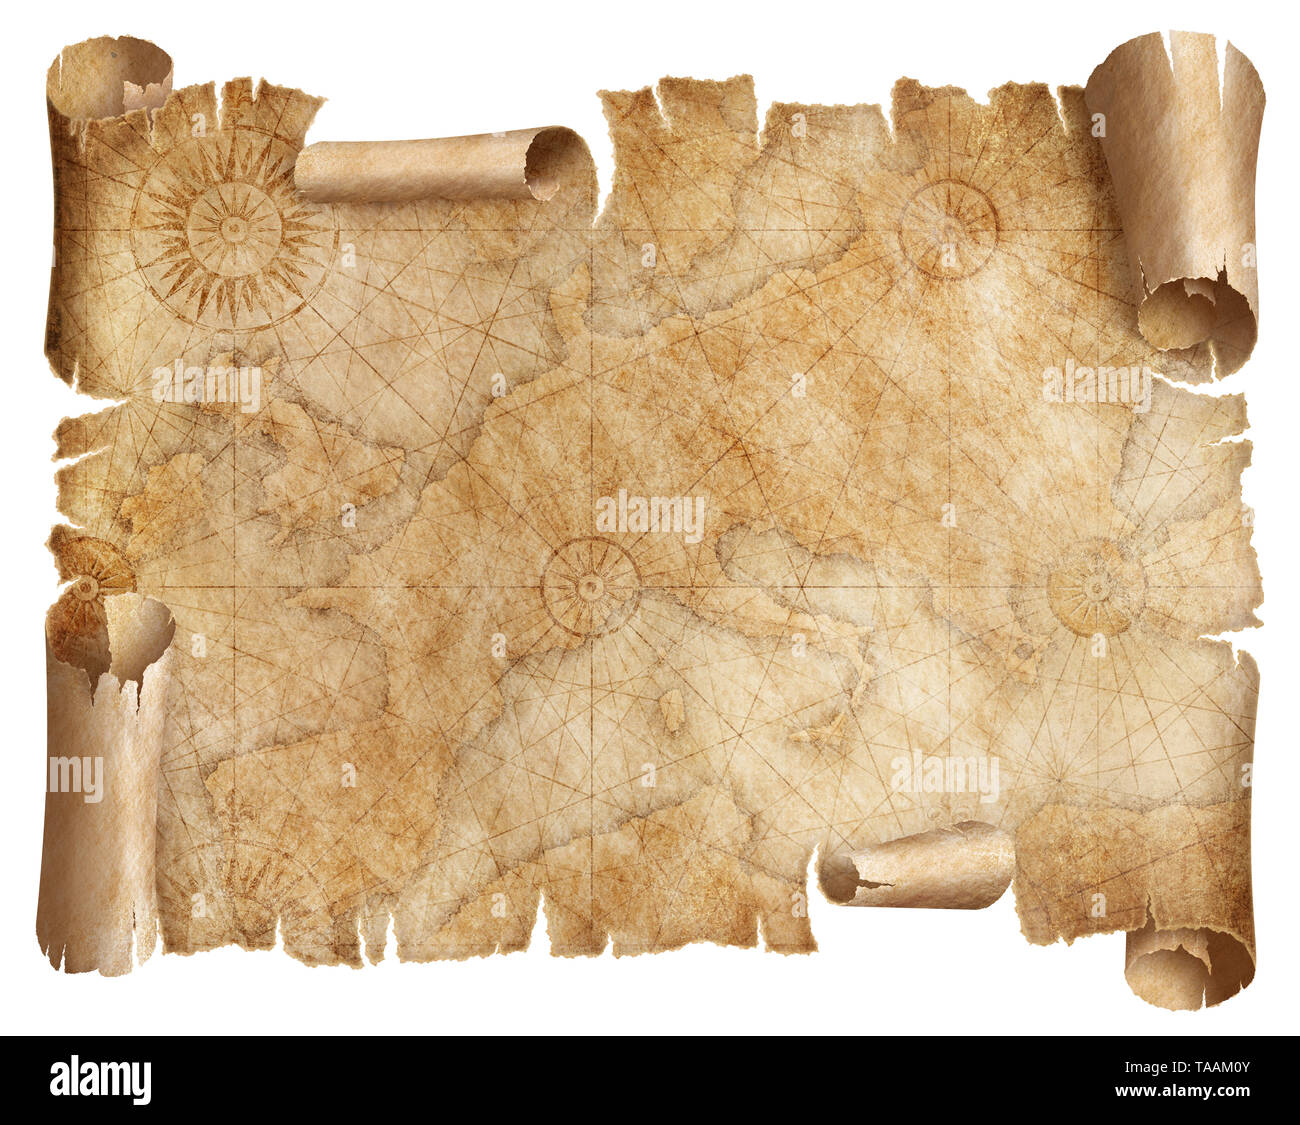 Vintage Europe map parchment isolated on white. Based on image furnished from NASA. Stock Photo